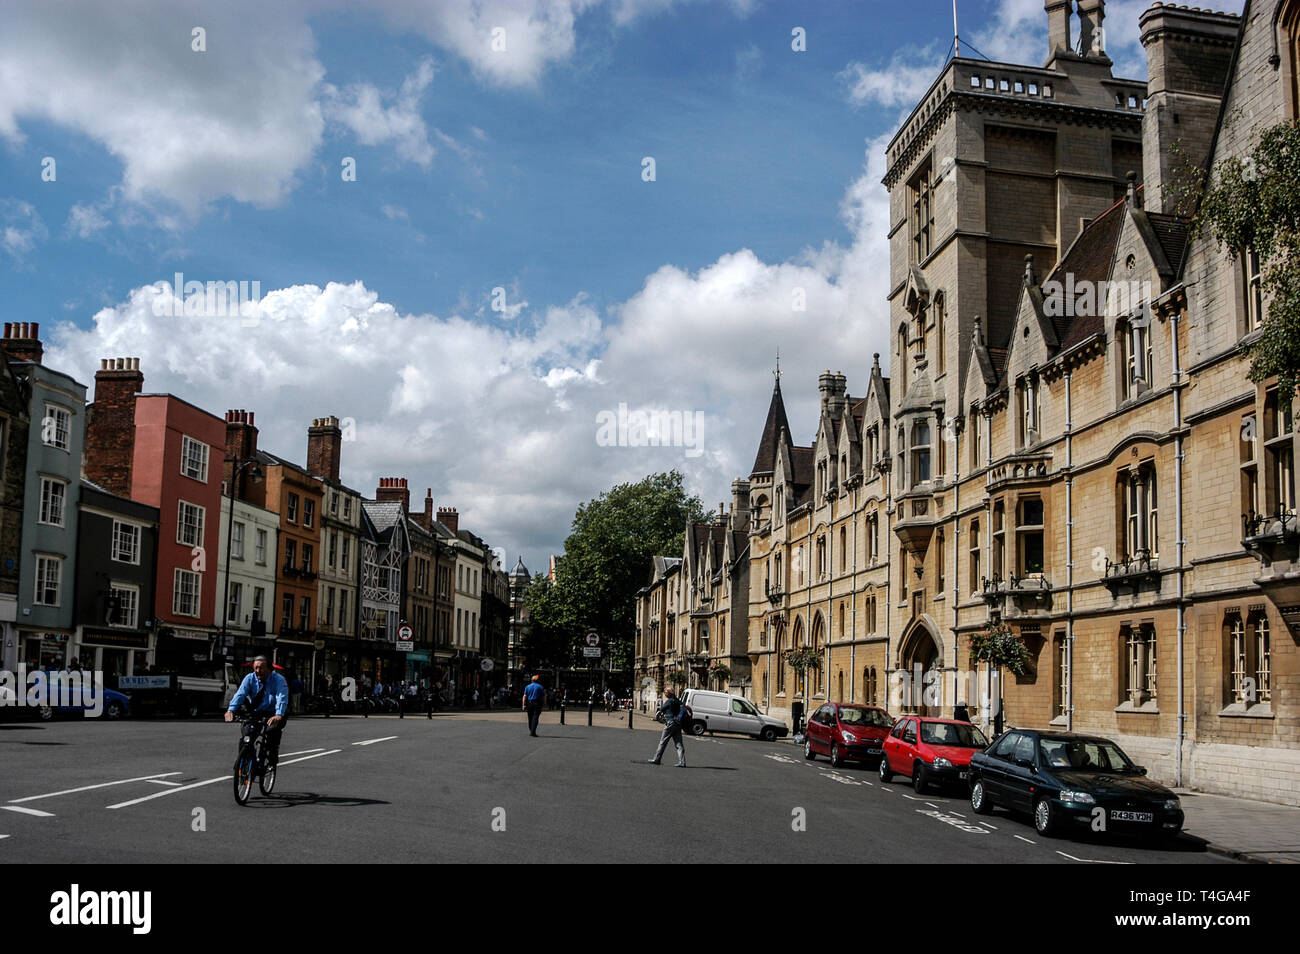 Balliol College on the right in Broad Street, Oxford, Britain Stock Photo